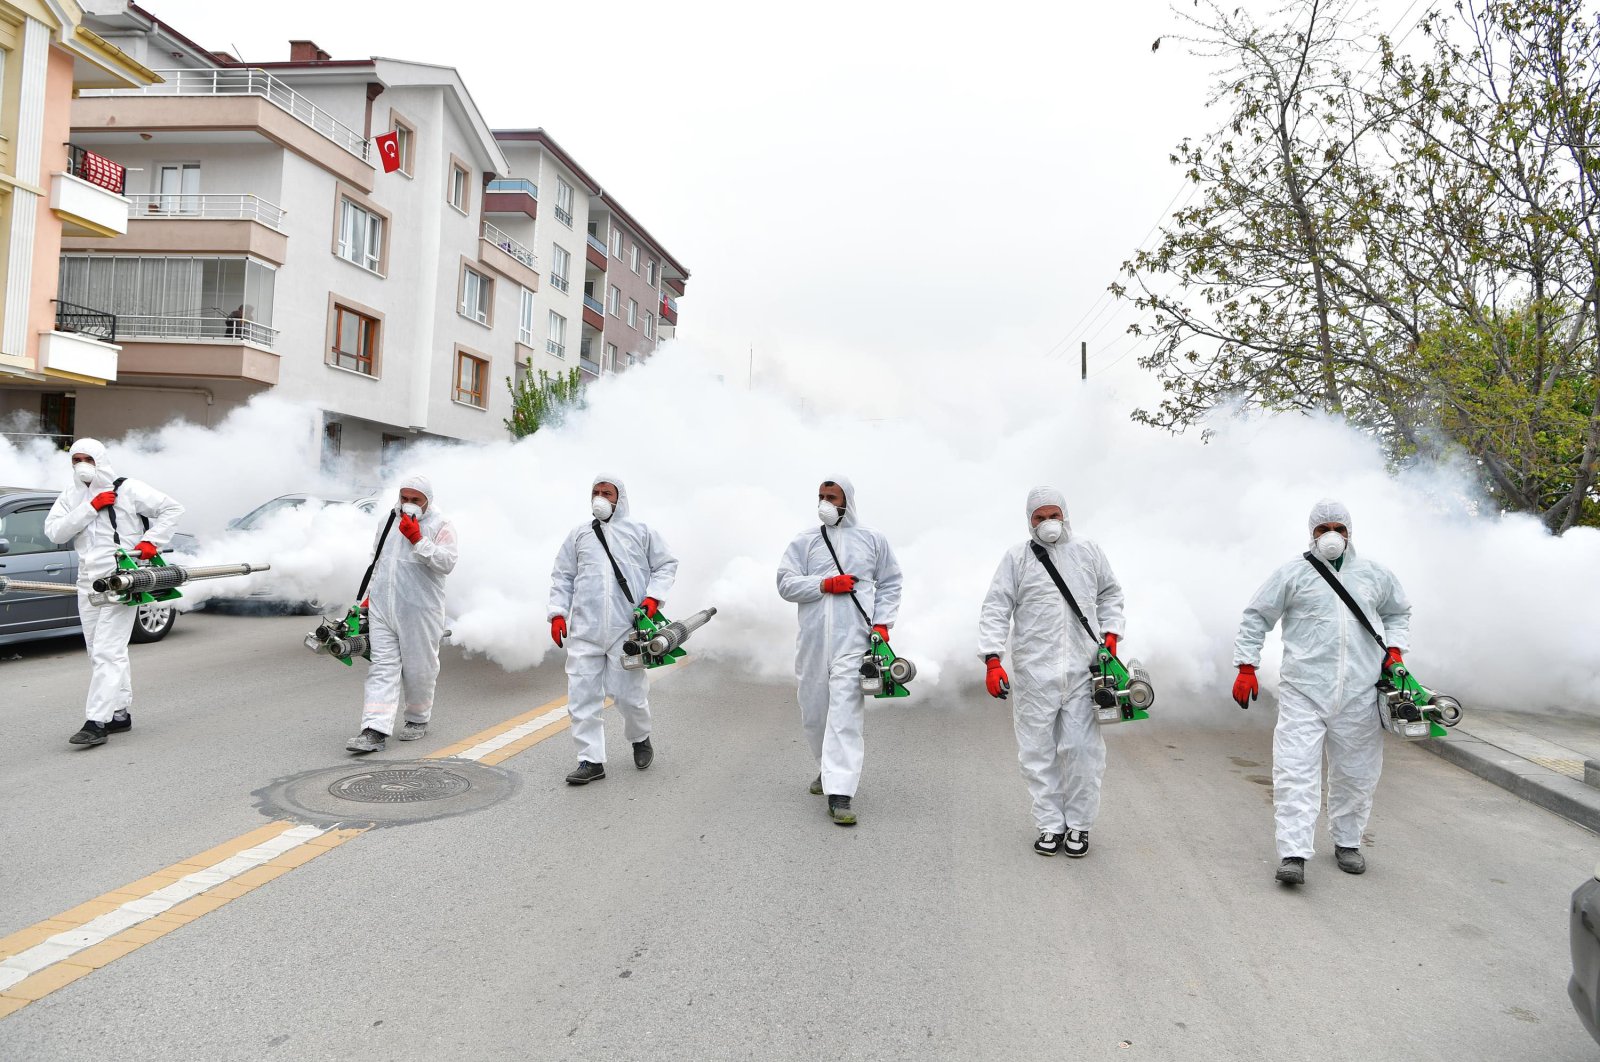 Municipality workers spray disinfectant on a street in Mamak district in Ankara, Turkey, April 30, 2020. (DHA Photo)